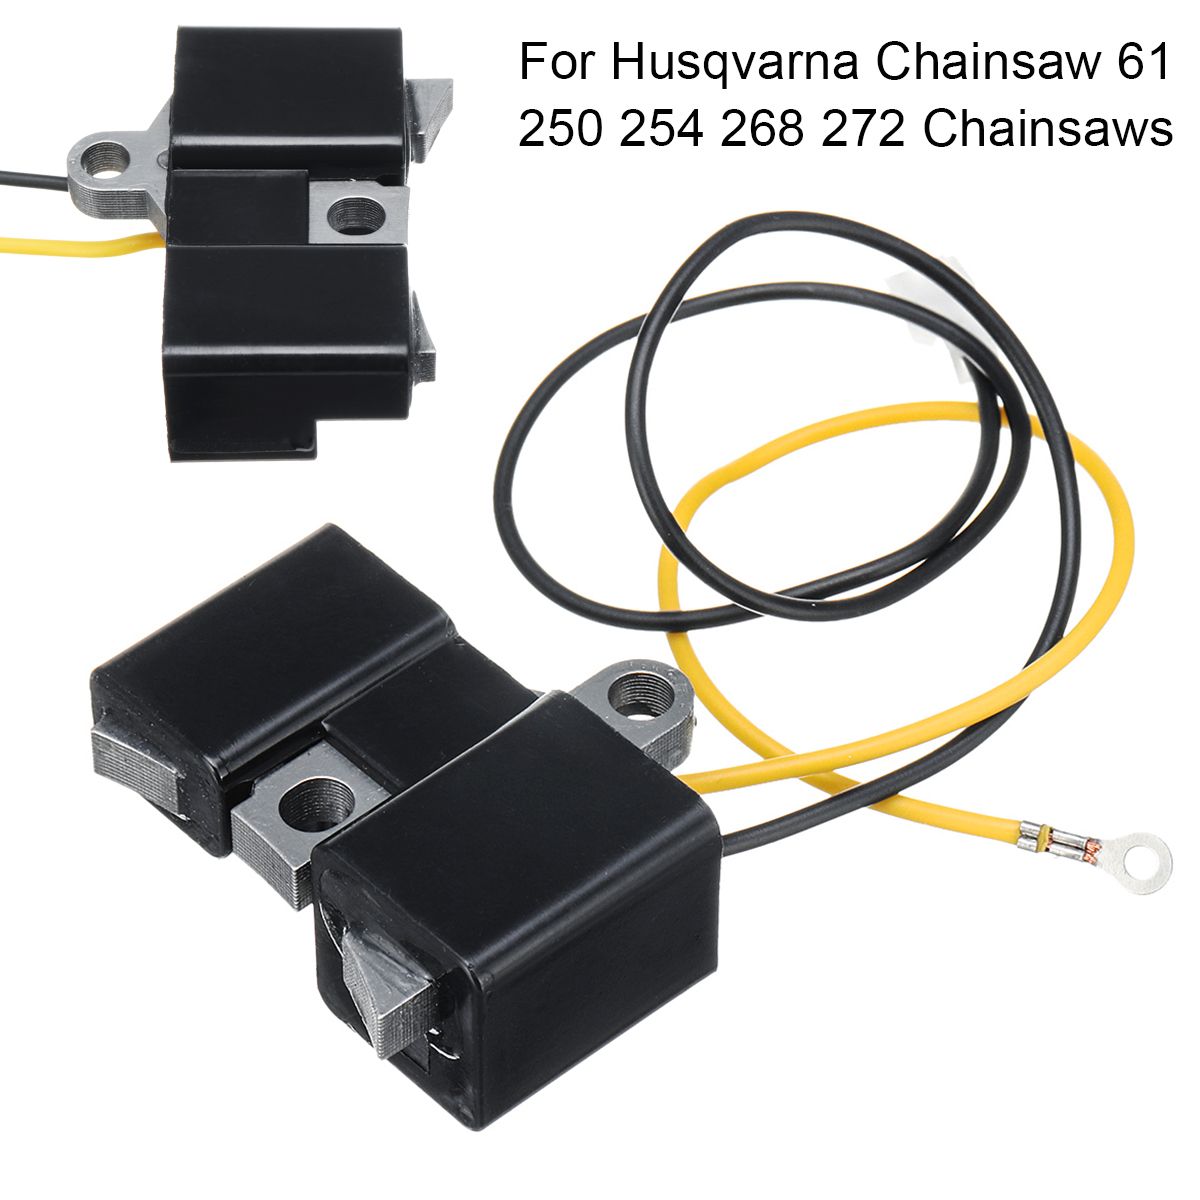 Replacement-Ignition-Coil-Ignition-Module-For-Husqvarna-Chainsaw-61-250-254-268-272-Chainsaw-Parts-A-1412557